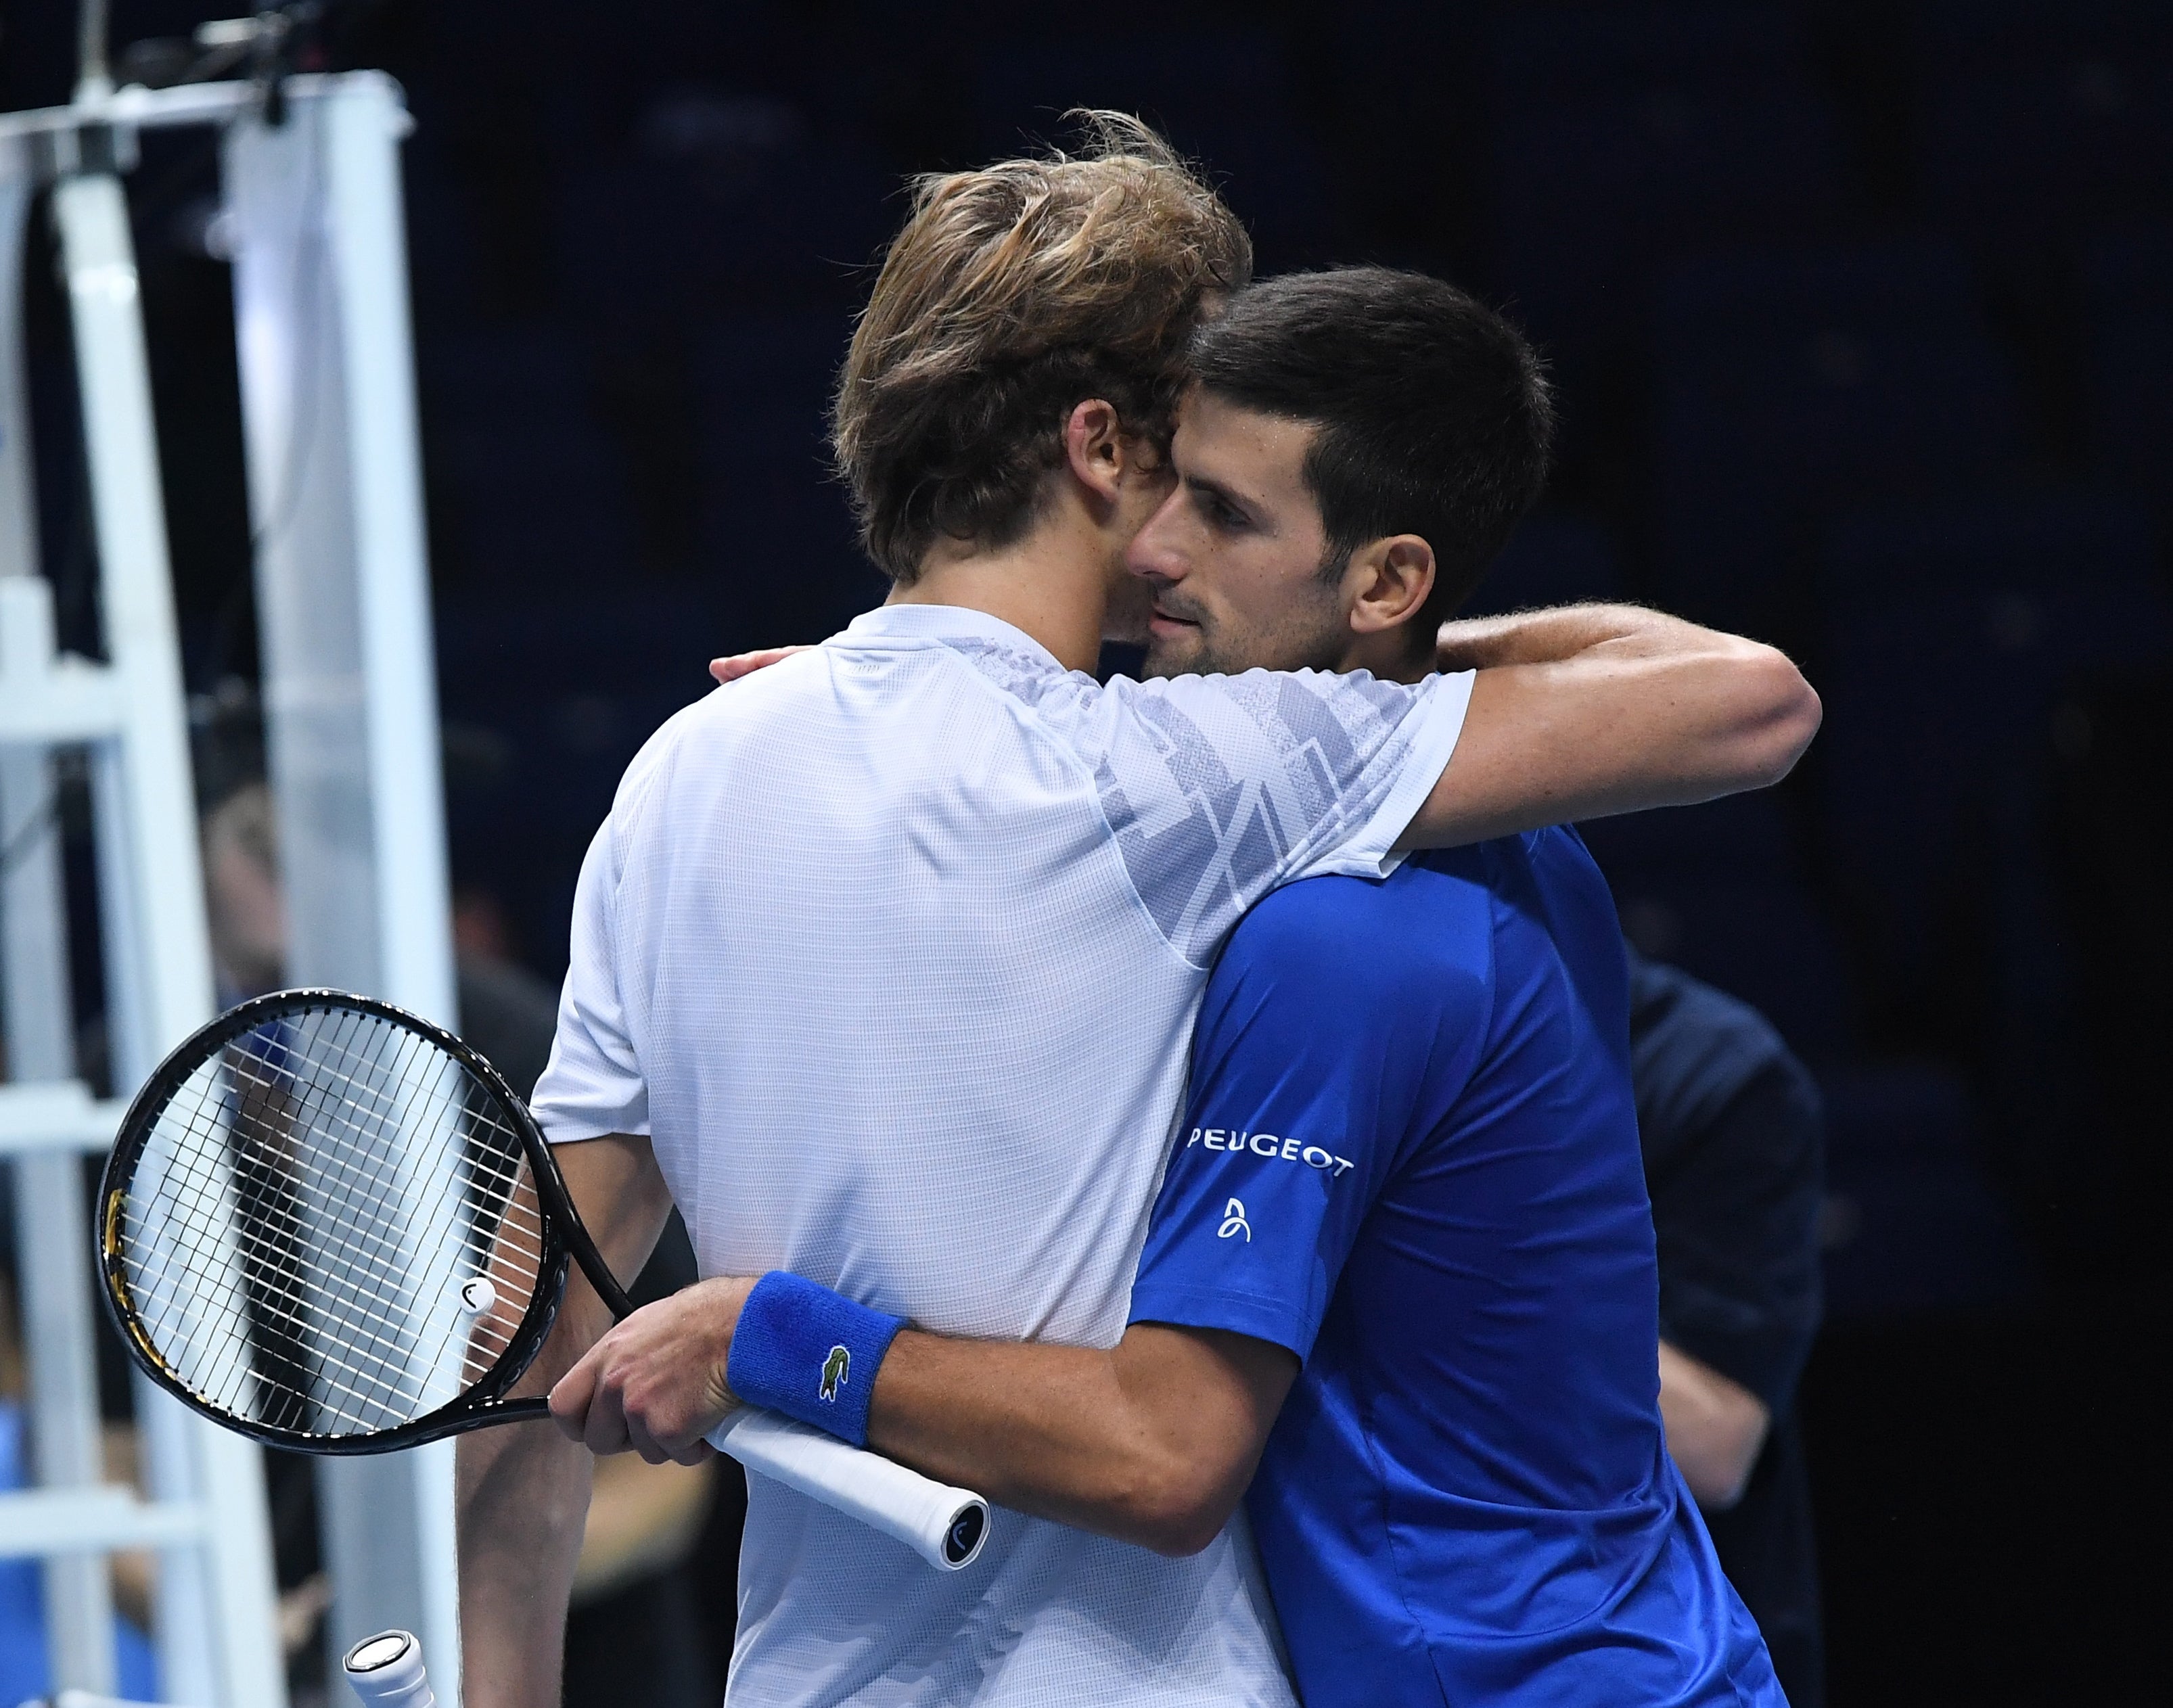 Novak Djokovic has shown his support for Alexander Zverev over allegations against him of domestic abuse